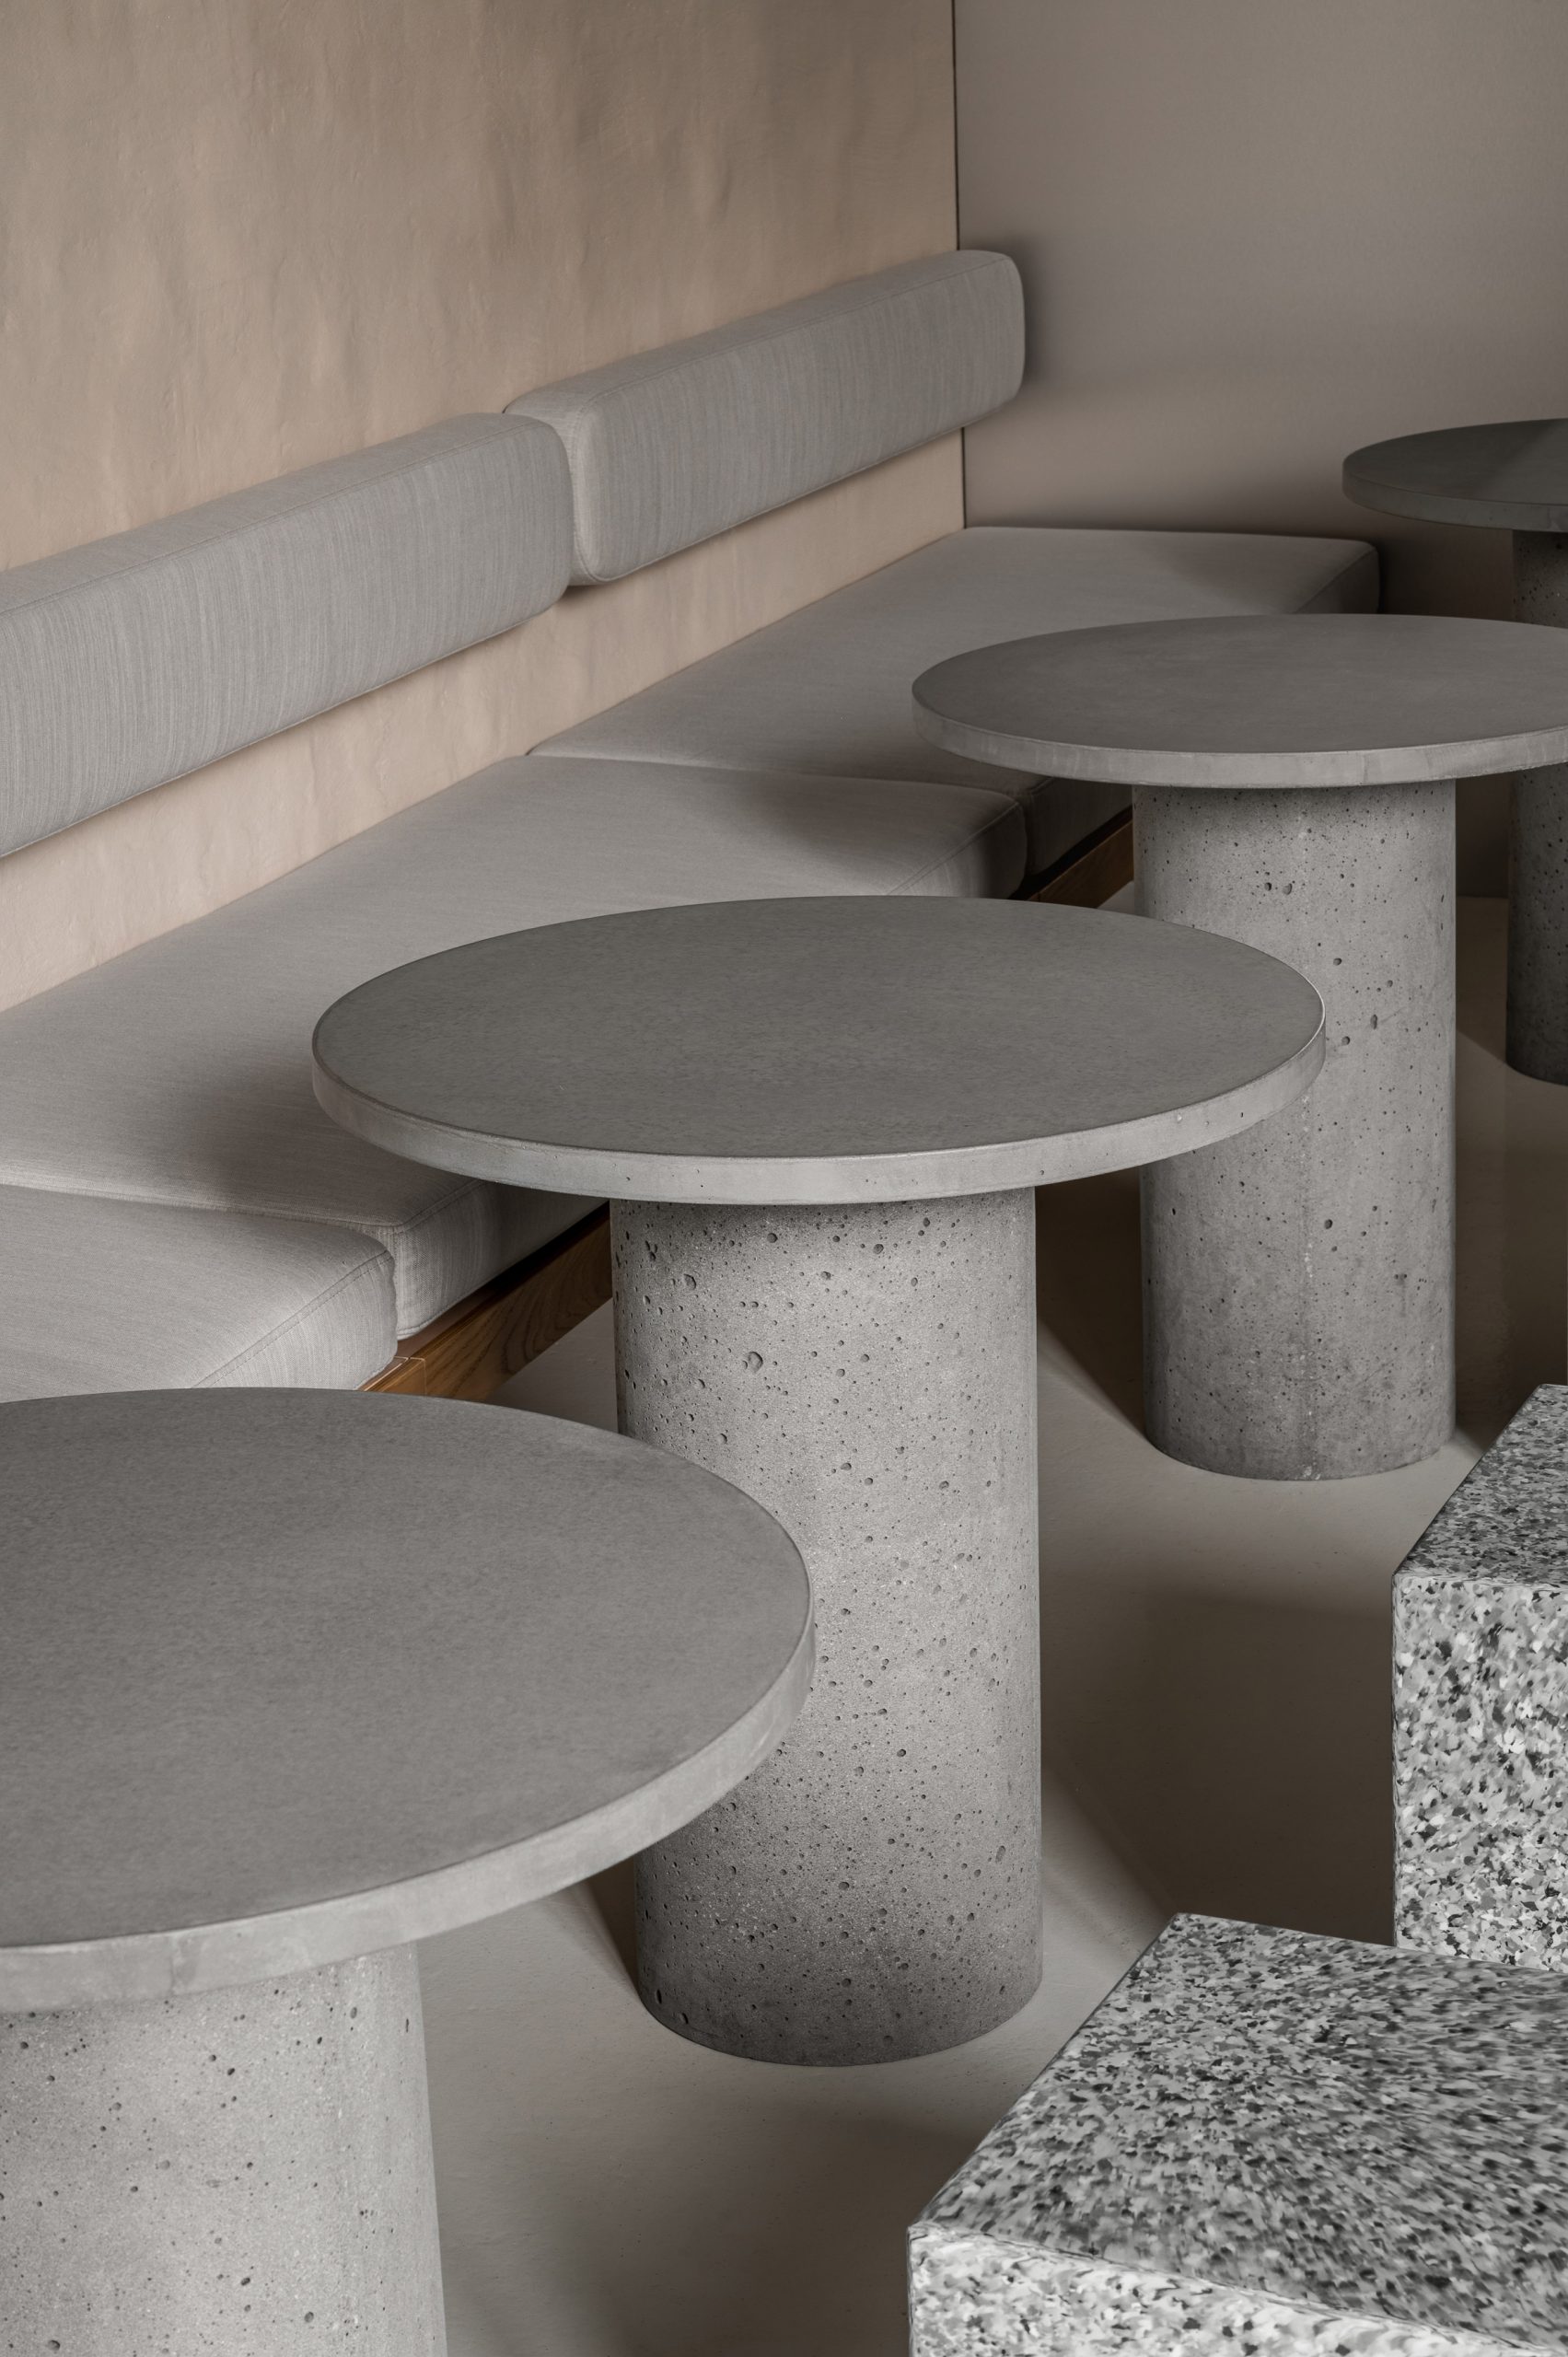 Round concrete tables and bench seating in IteIstetyka restaurant